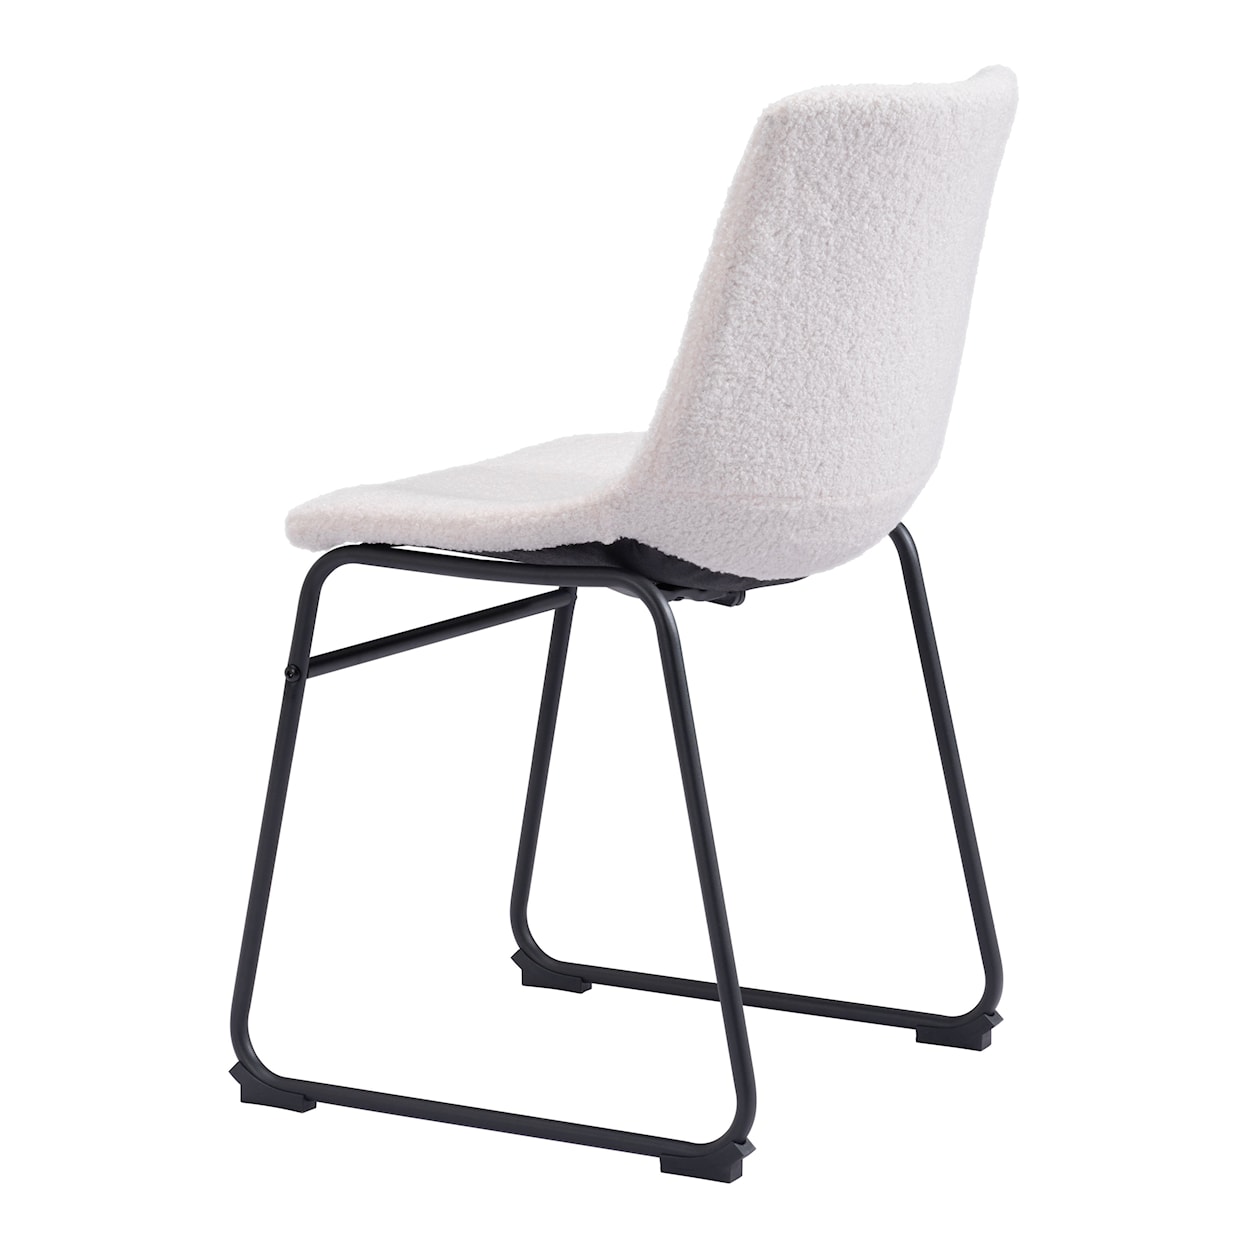 Zuo Smart Dining Chair Set